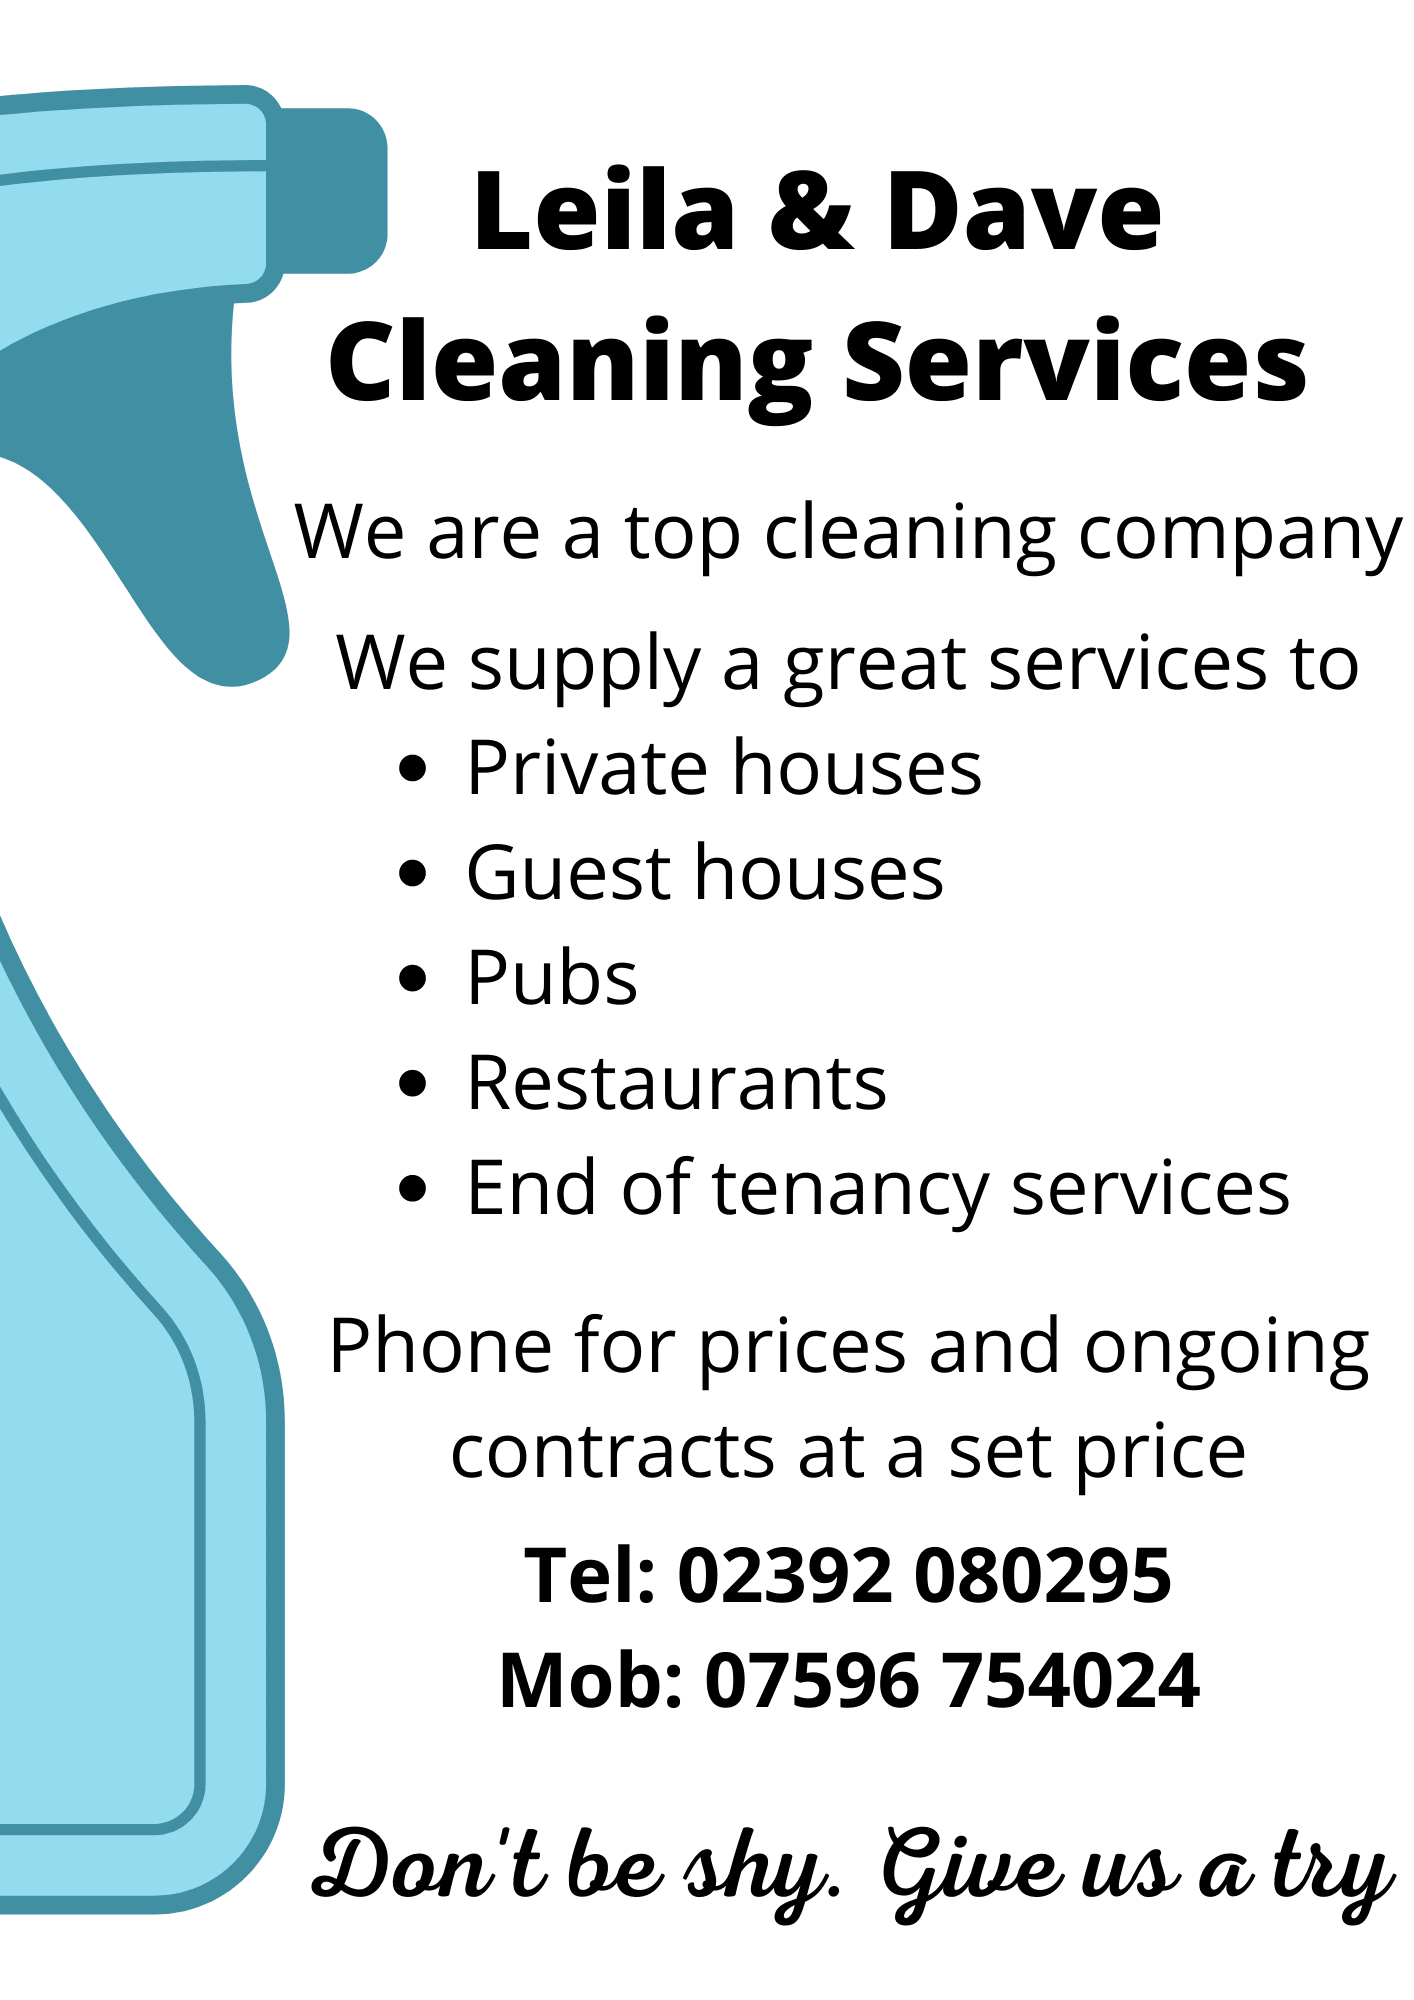 Leila and Dave's Cleaning Services